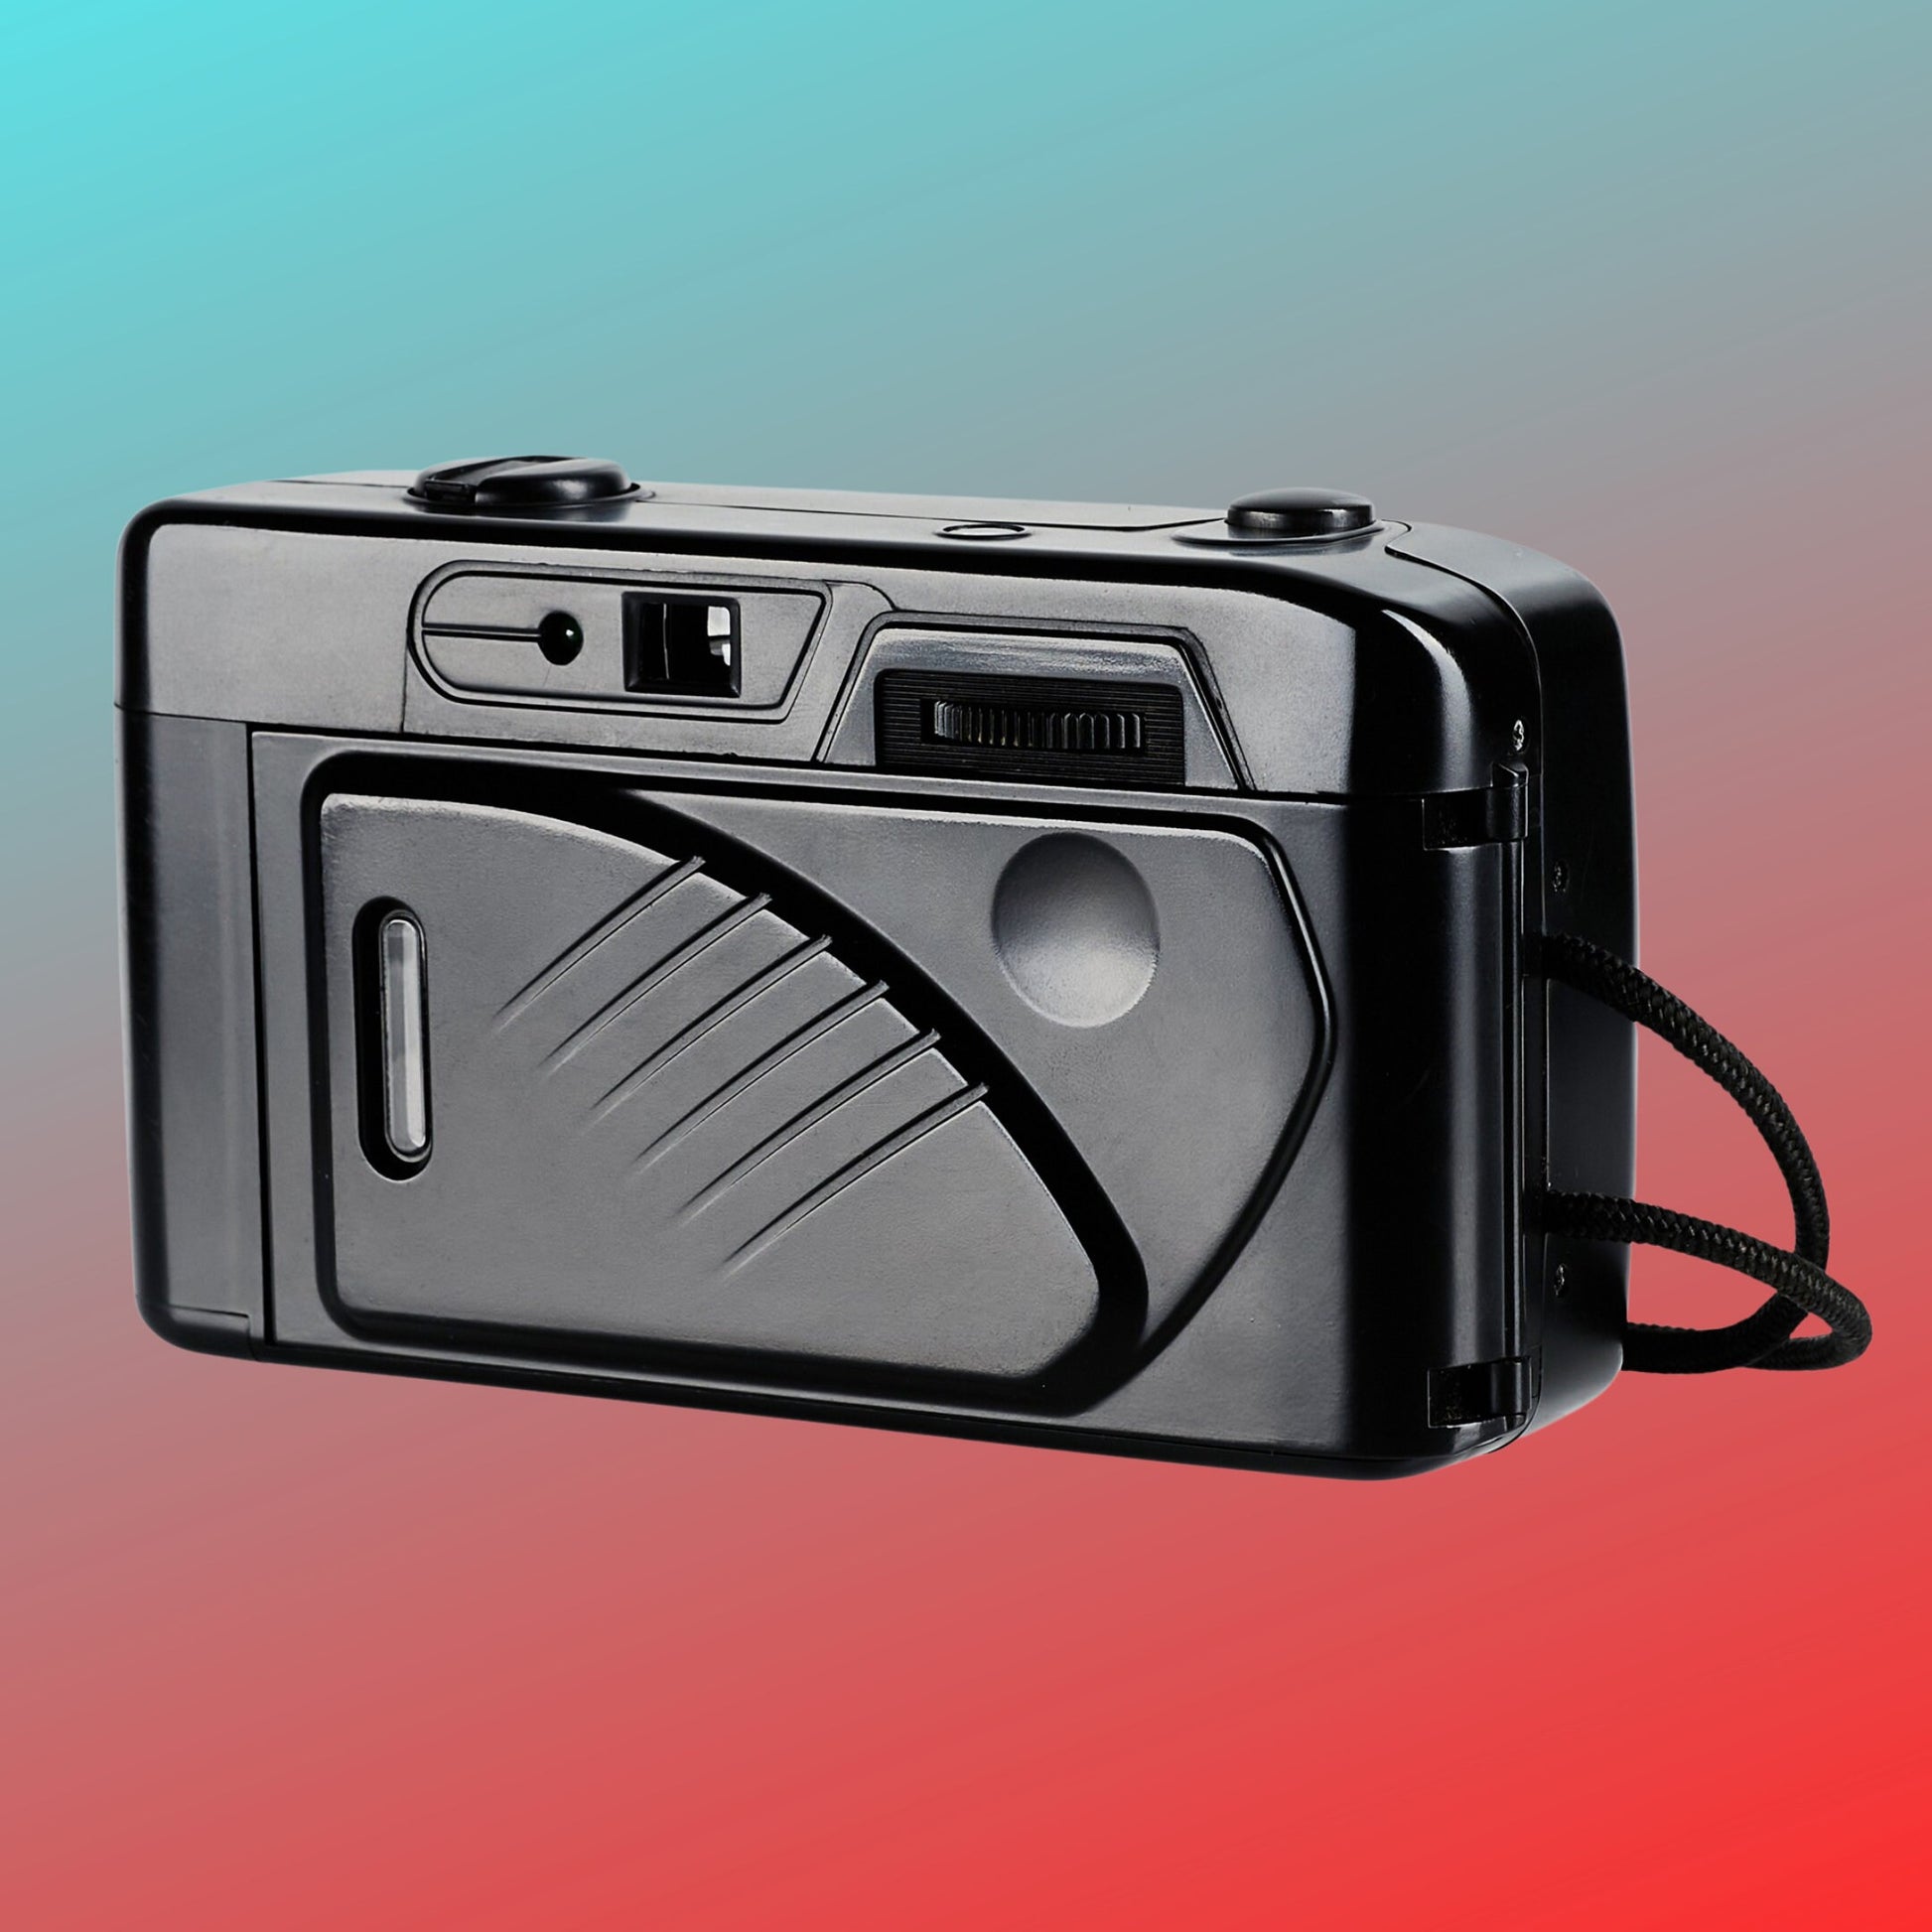 NEW!! Olympus  Vintage Camera, Point and Shot Camera, Olympus Shoot and Go - Vintage Polaroid Instant Cameras